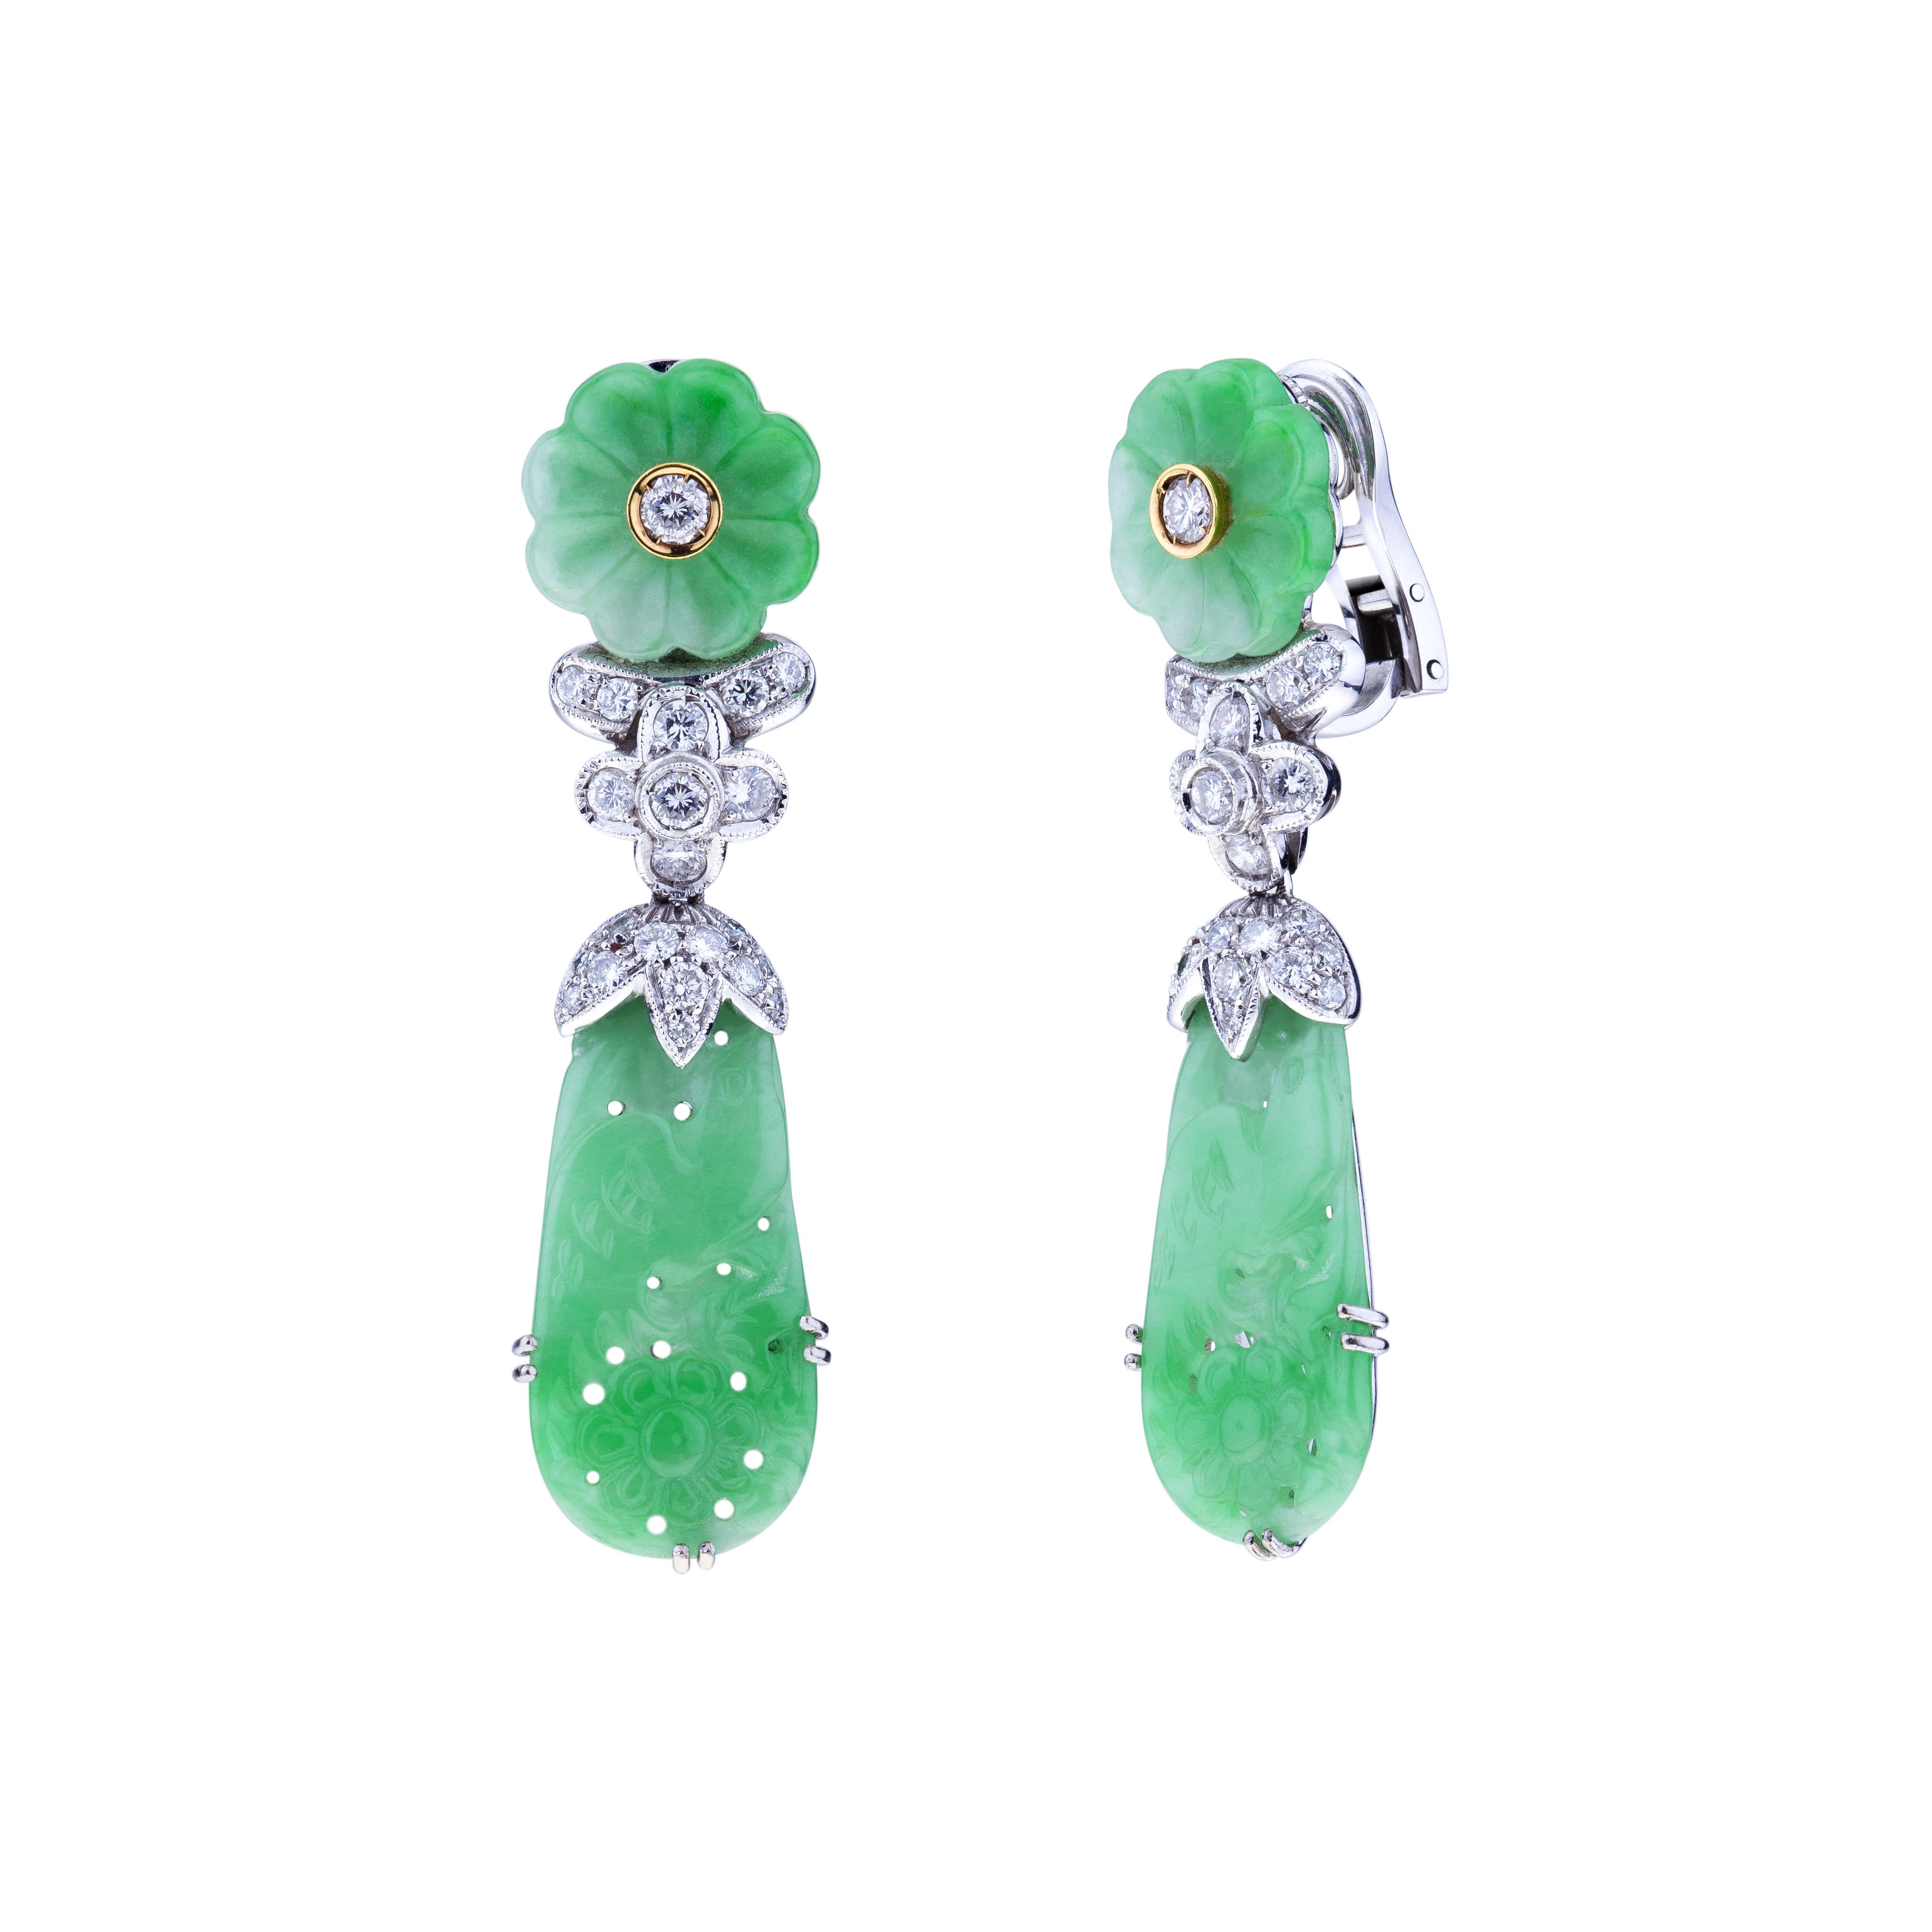 High Quality Translucent Hand Carved Jade Earrings with Diamonds.
The Magic of the Jade of these Earrings Comes from Being Translucent and Yet Being Among the Hardest Materials Present in Nature. Jade is Attributed with Great 